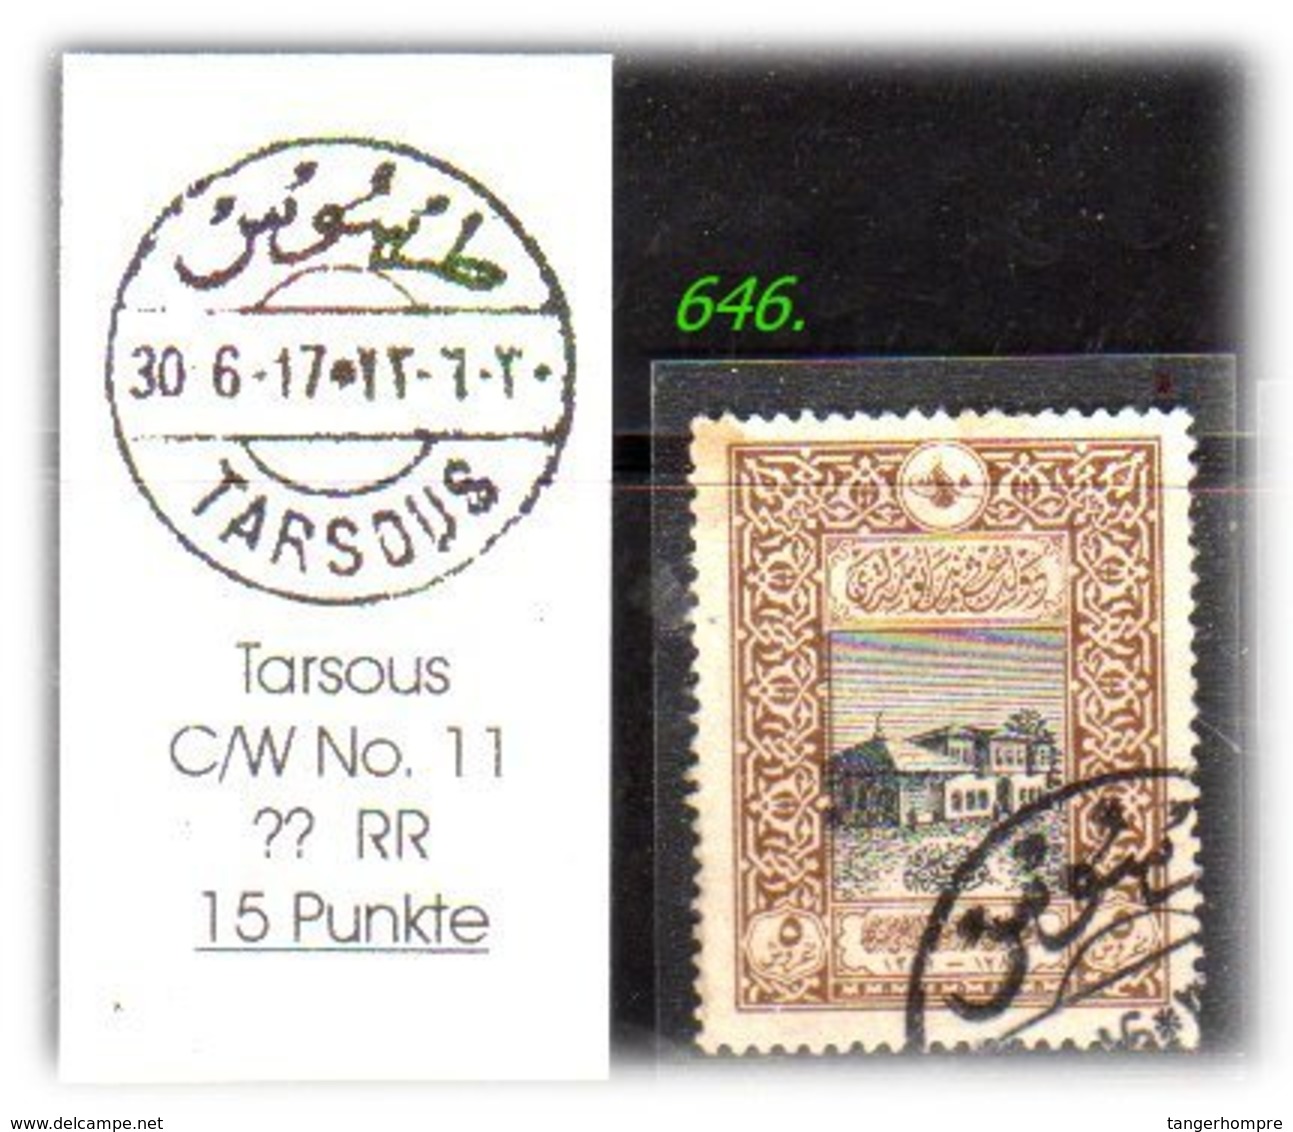 EARLY OTTOMAN SPECIALIZED FOR SPECIALIST, SEE....Stempel - TARSOUS -RR- - Gebruikt